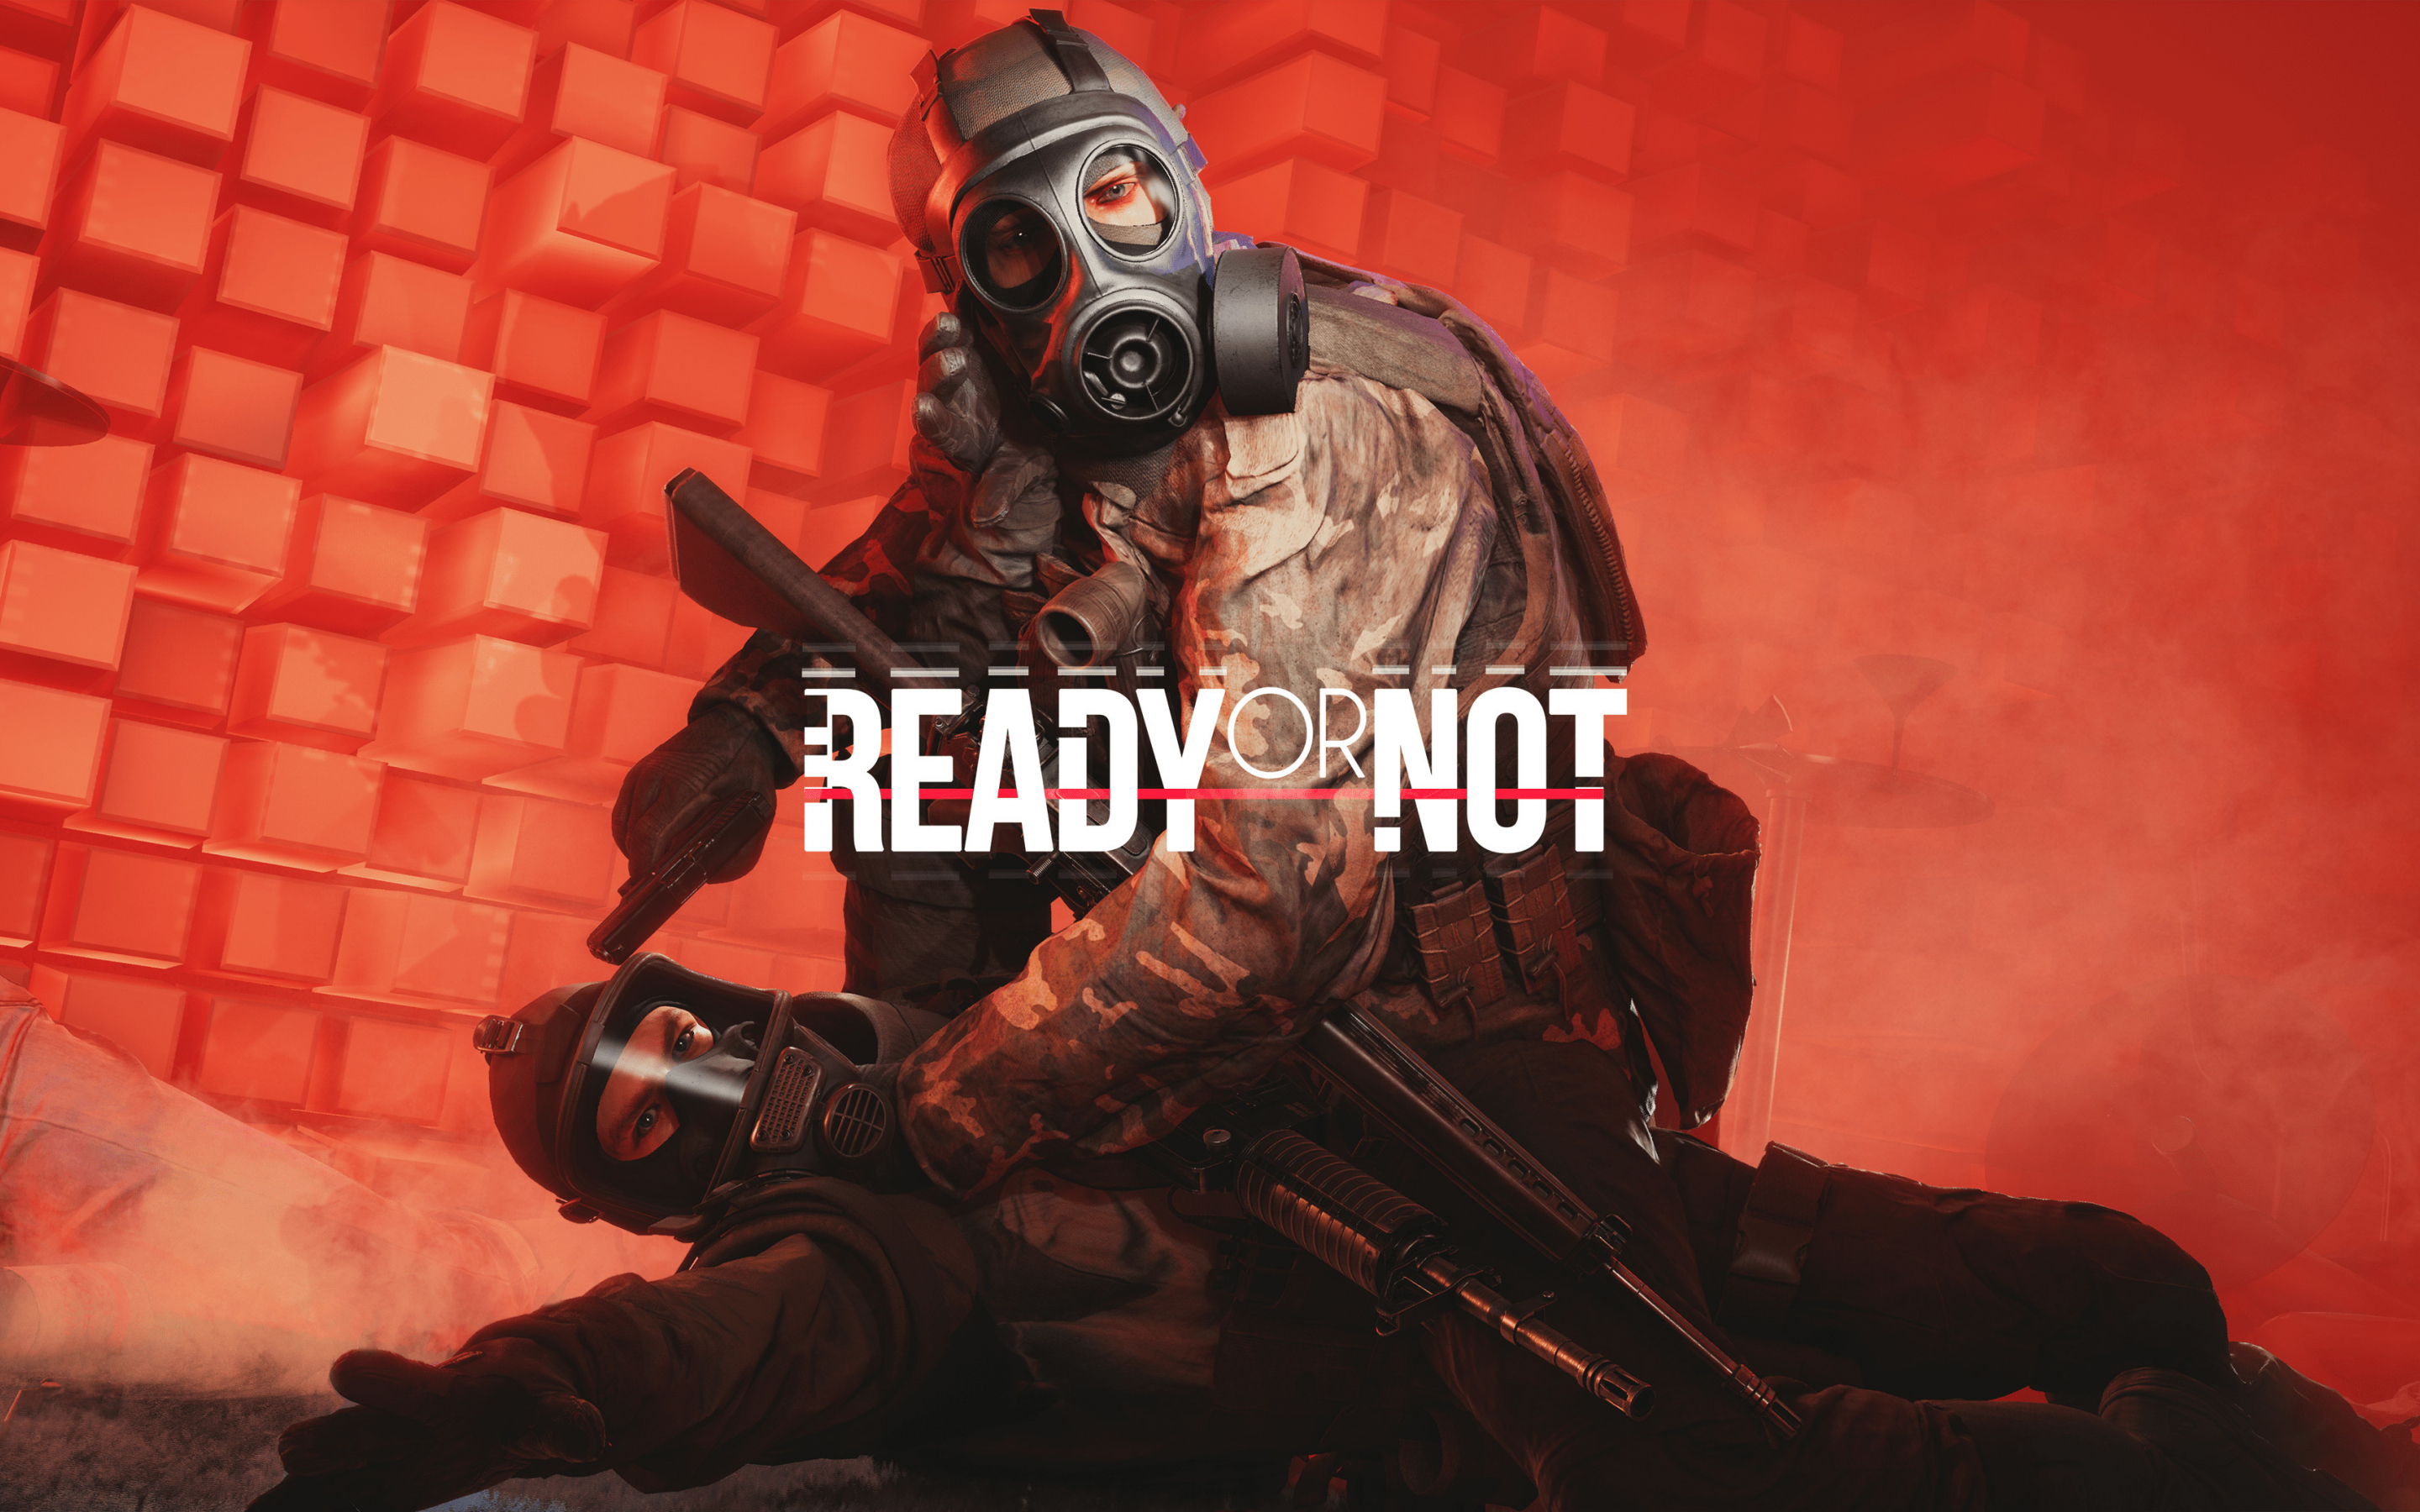 Ready or not, soldiers, video game, masks, 2880x1800 wallpaper